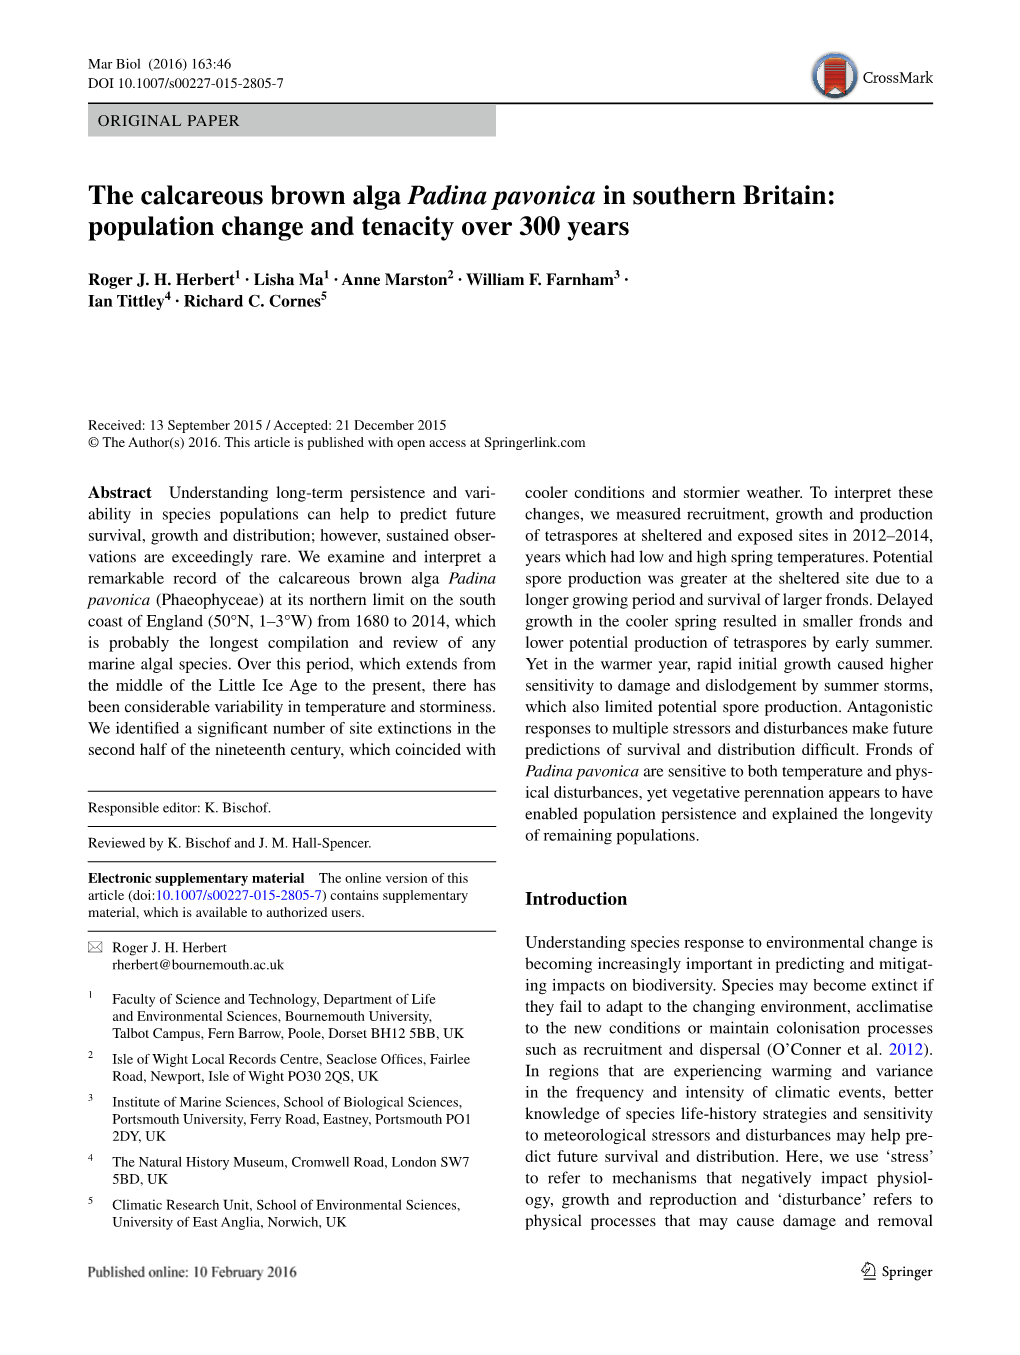 The Calcareous Brown Alga Padina Pavonica in Southern Britain: Population Change and Tenacity Over 300 Years